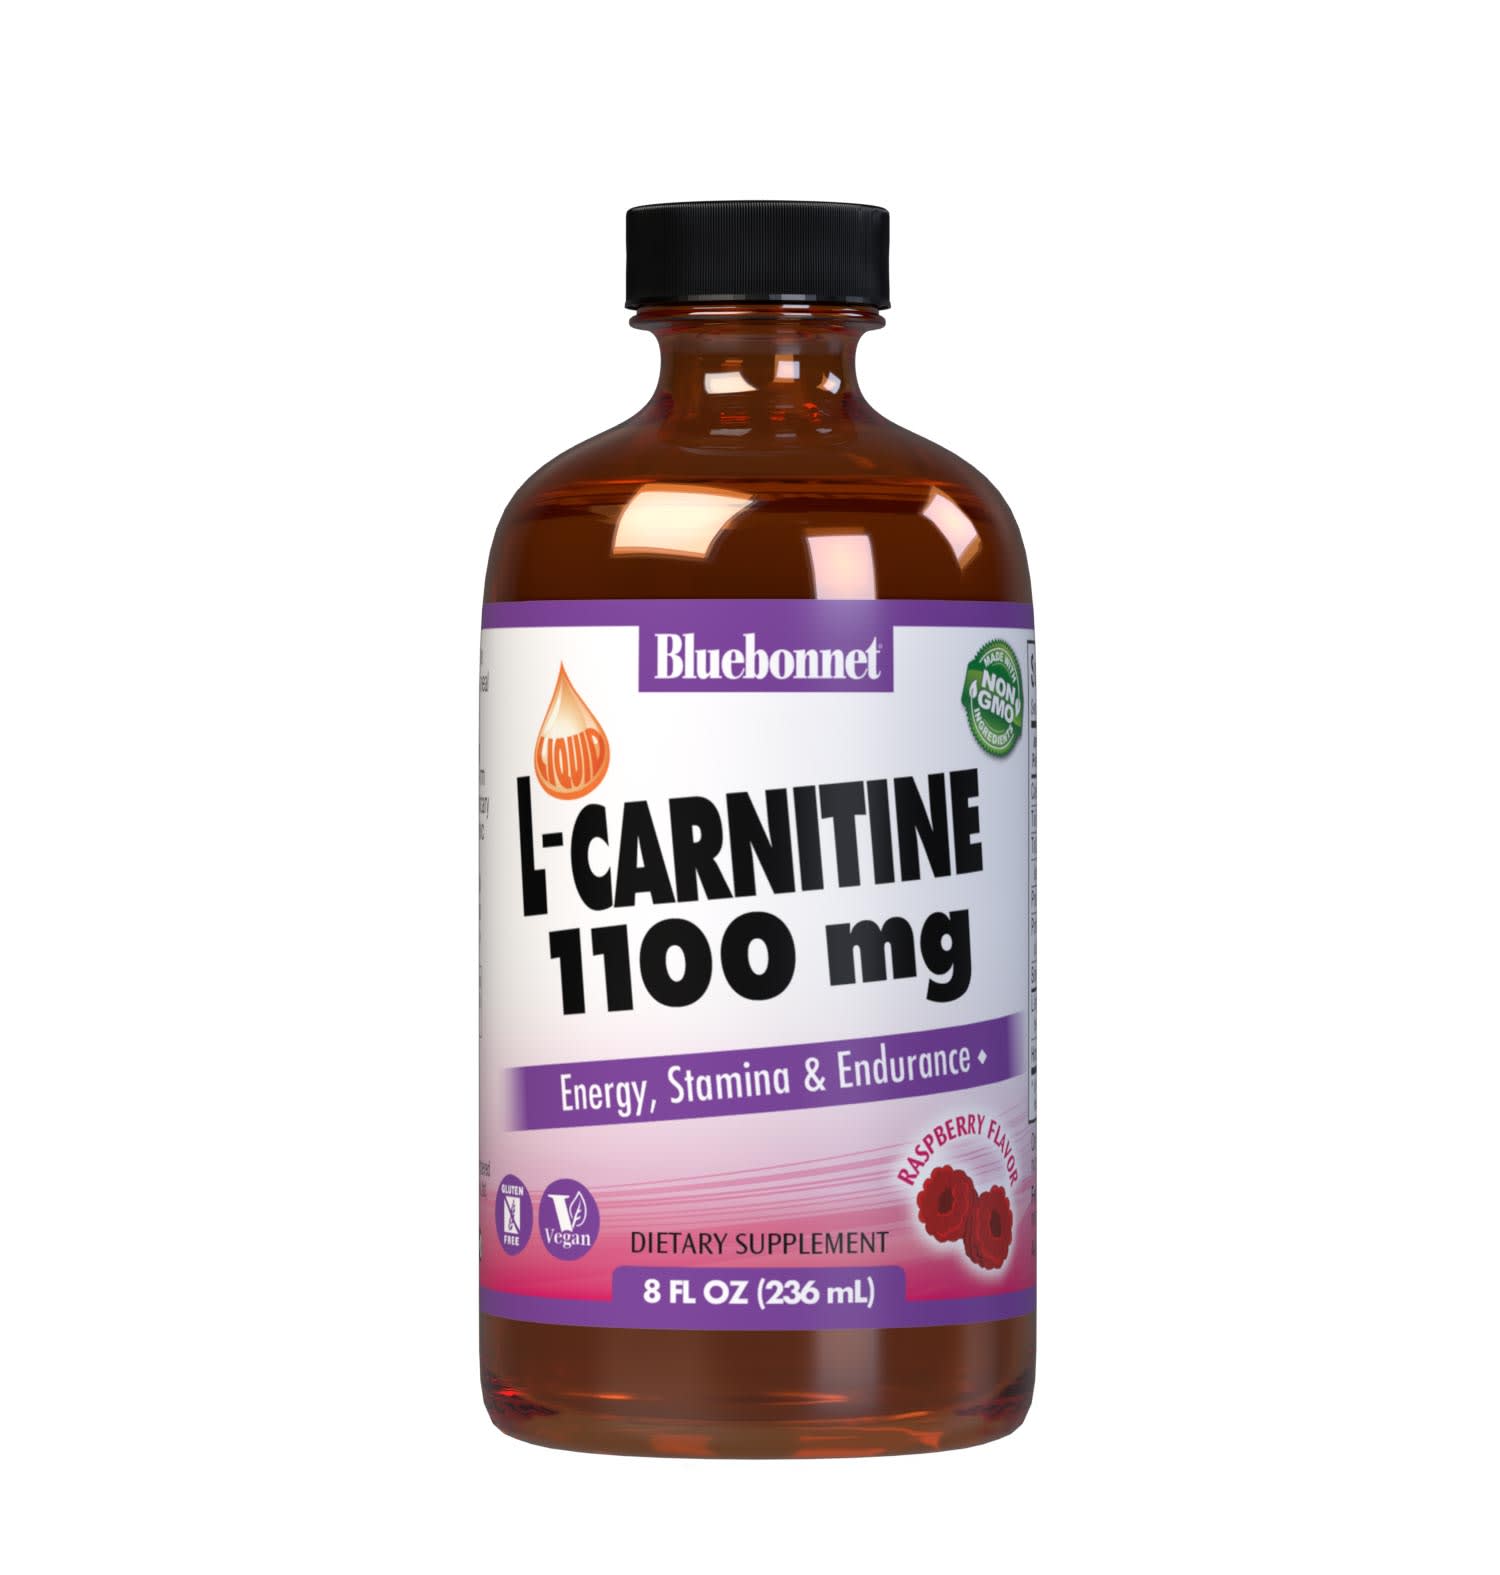 Bluebonnet's Liquid L-Carnitine 1100 mg is formulated with free-form L-carnitine from Lonza along with complementary ingredients, hydroxycitric acid and pantothenic acid to enhance energy production, stamina and endurance for an optimal workout. #size_8 fl oz